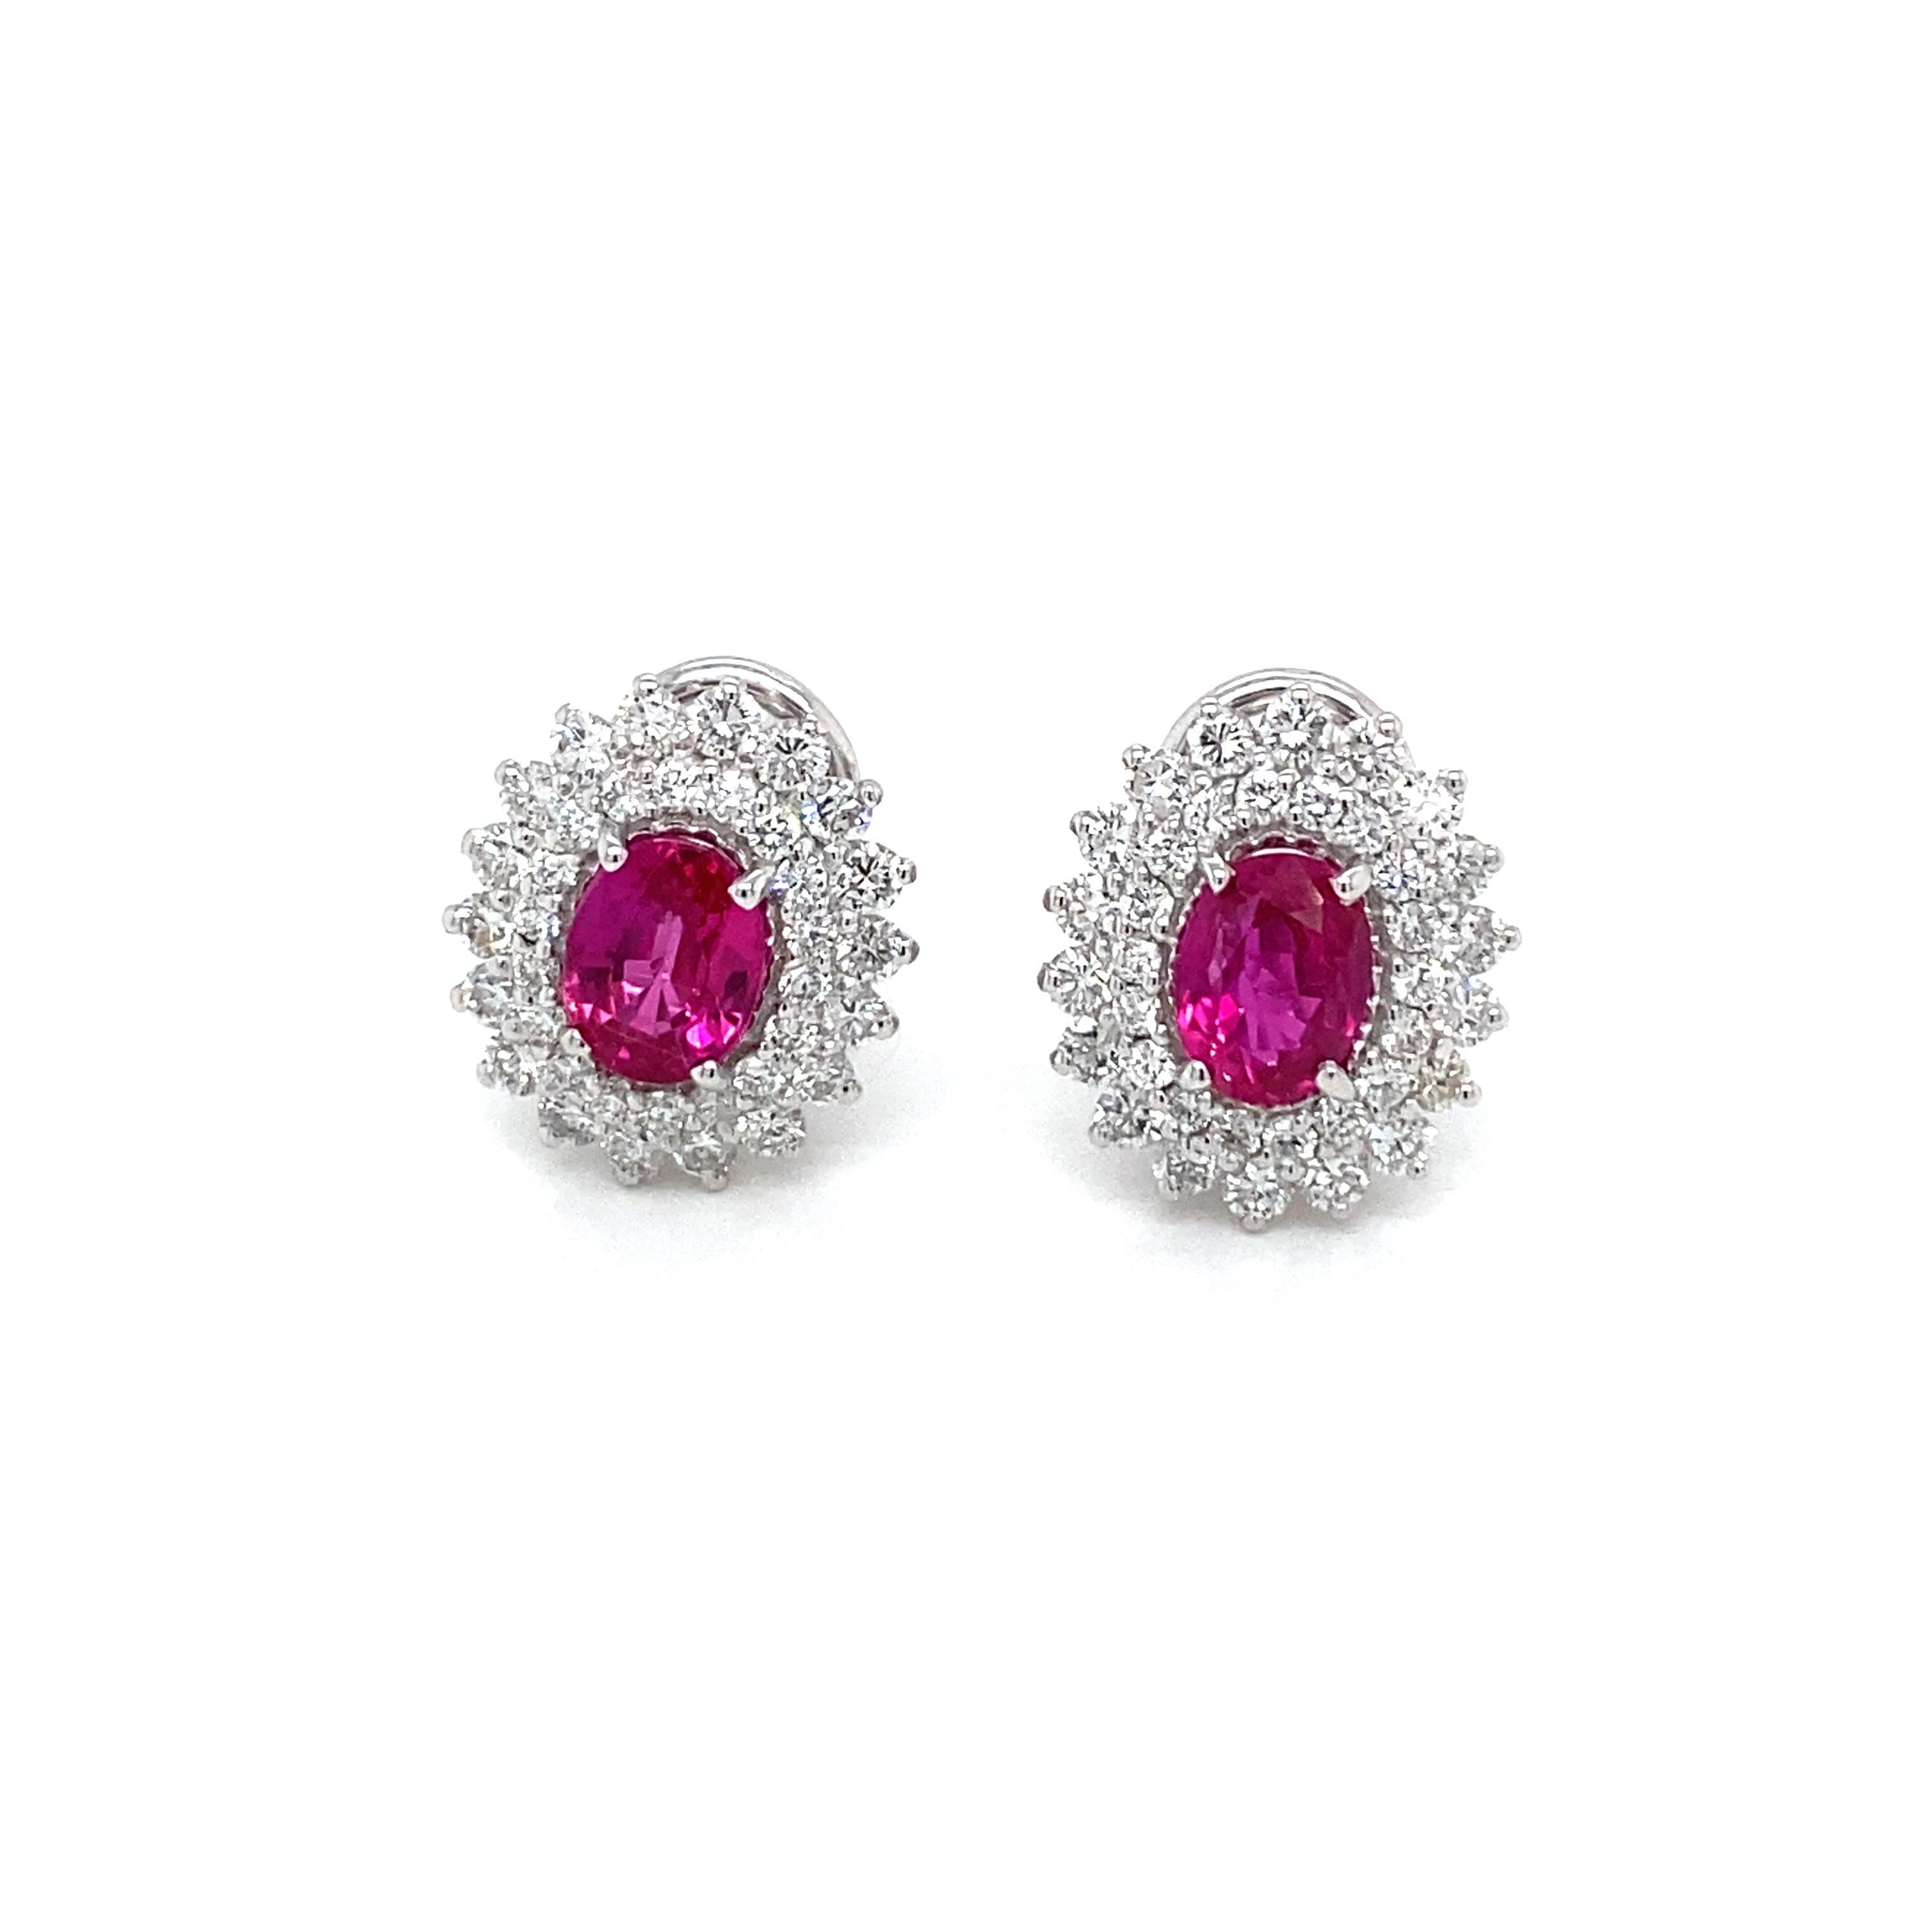 Gorgeous pair of vintage Natural Ruby diamond cluster earrings handcrafted in solid 18k white Gold. 

They are set with Bright Natural Ruby Oval cut in the center, total weight 2 carat, and surrounded by an halo of colorless sparkling Round